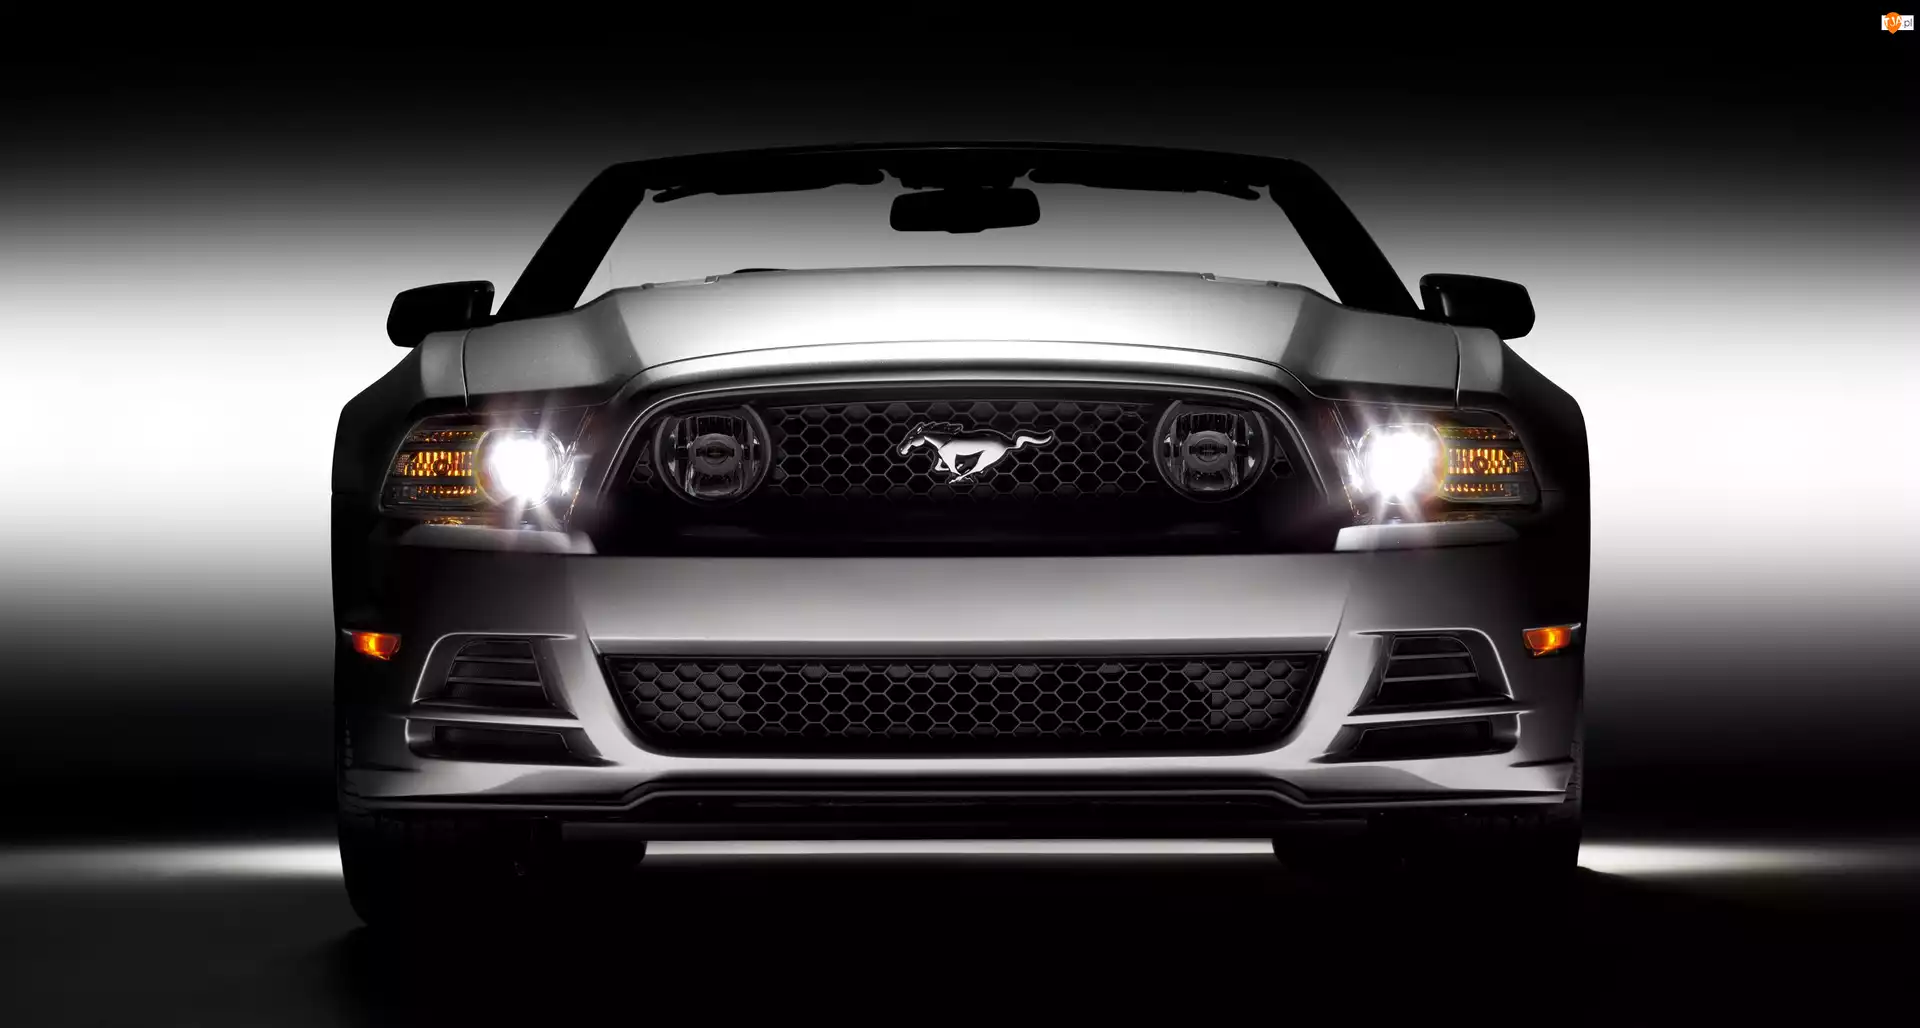 Ford Mustang GT, facelift